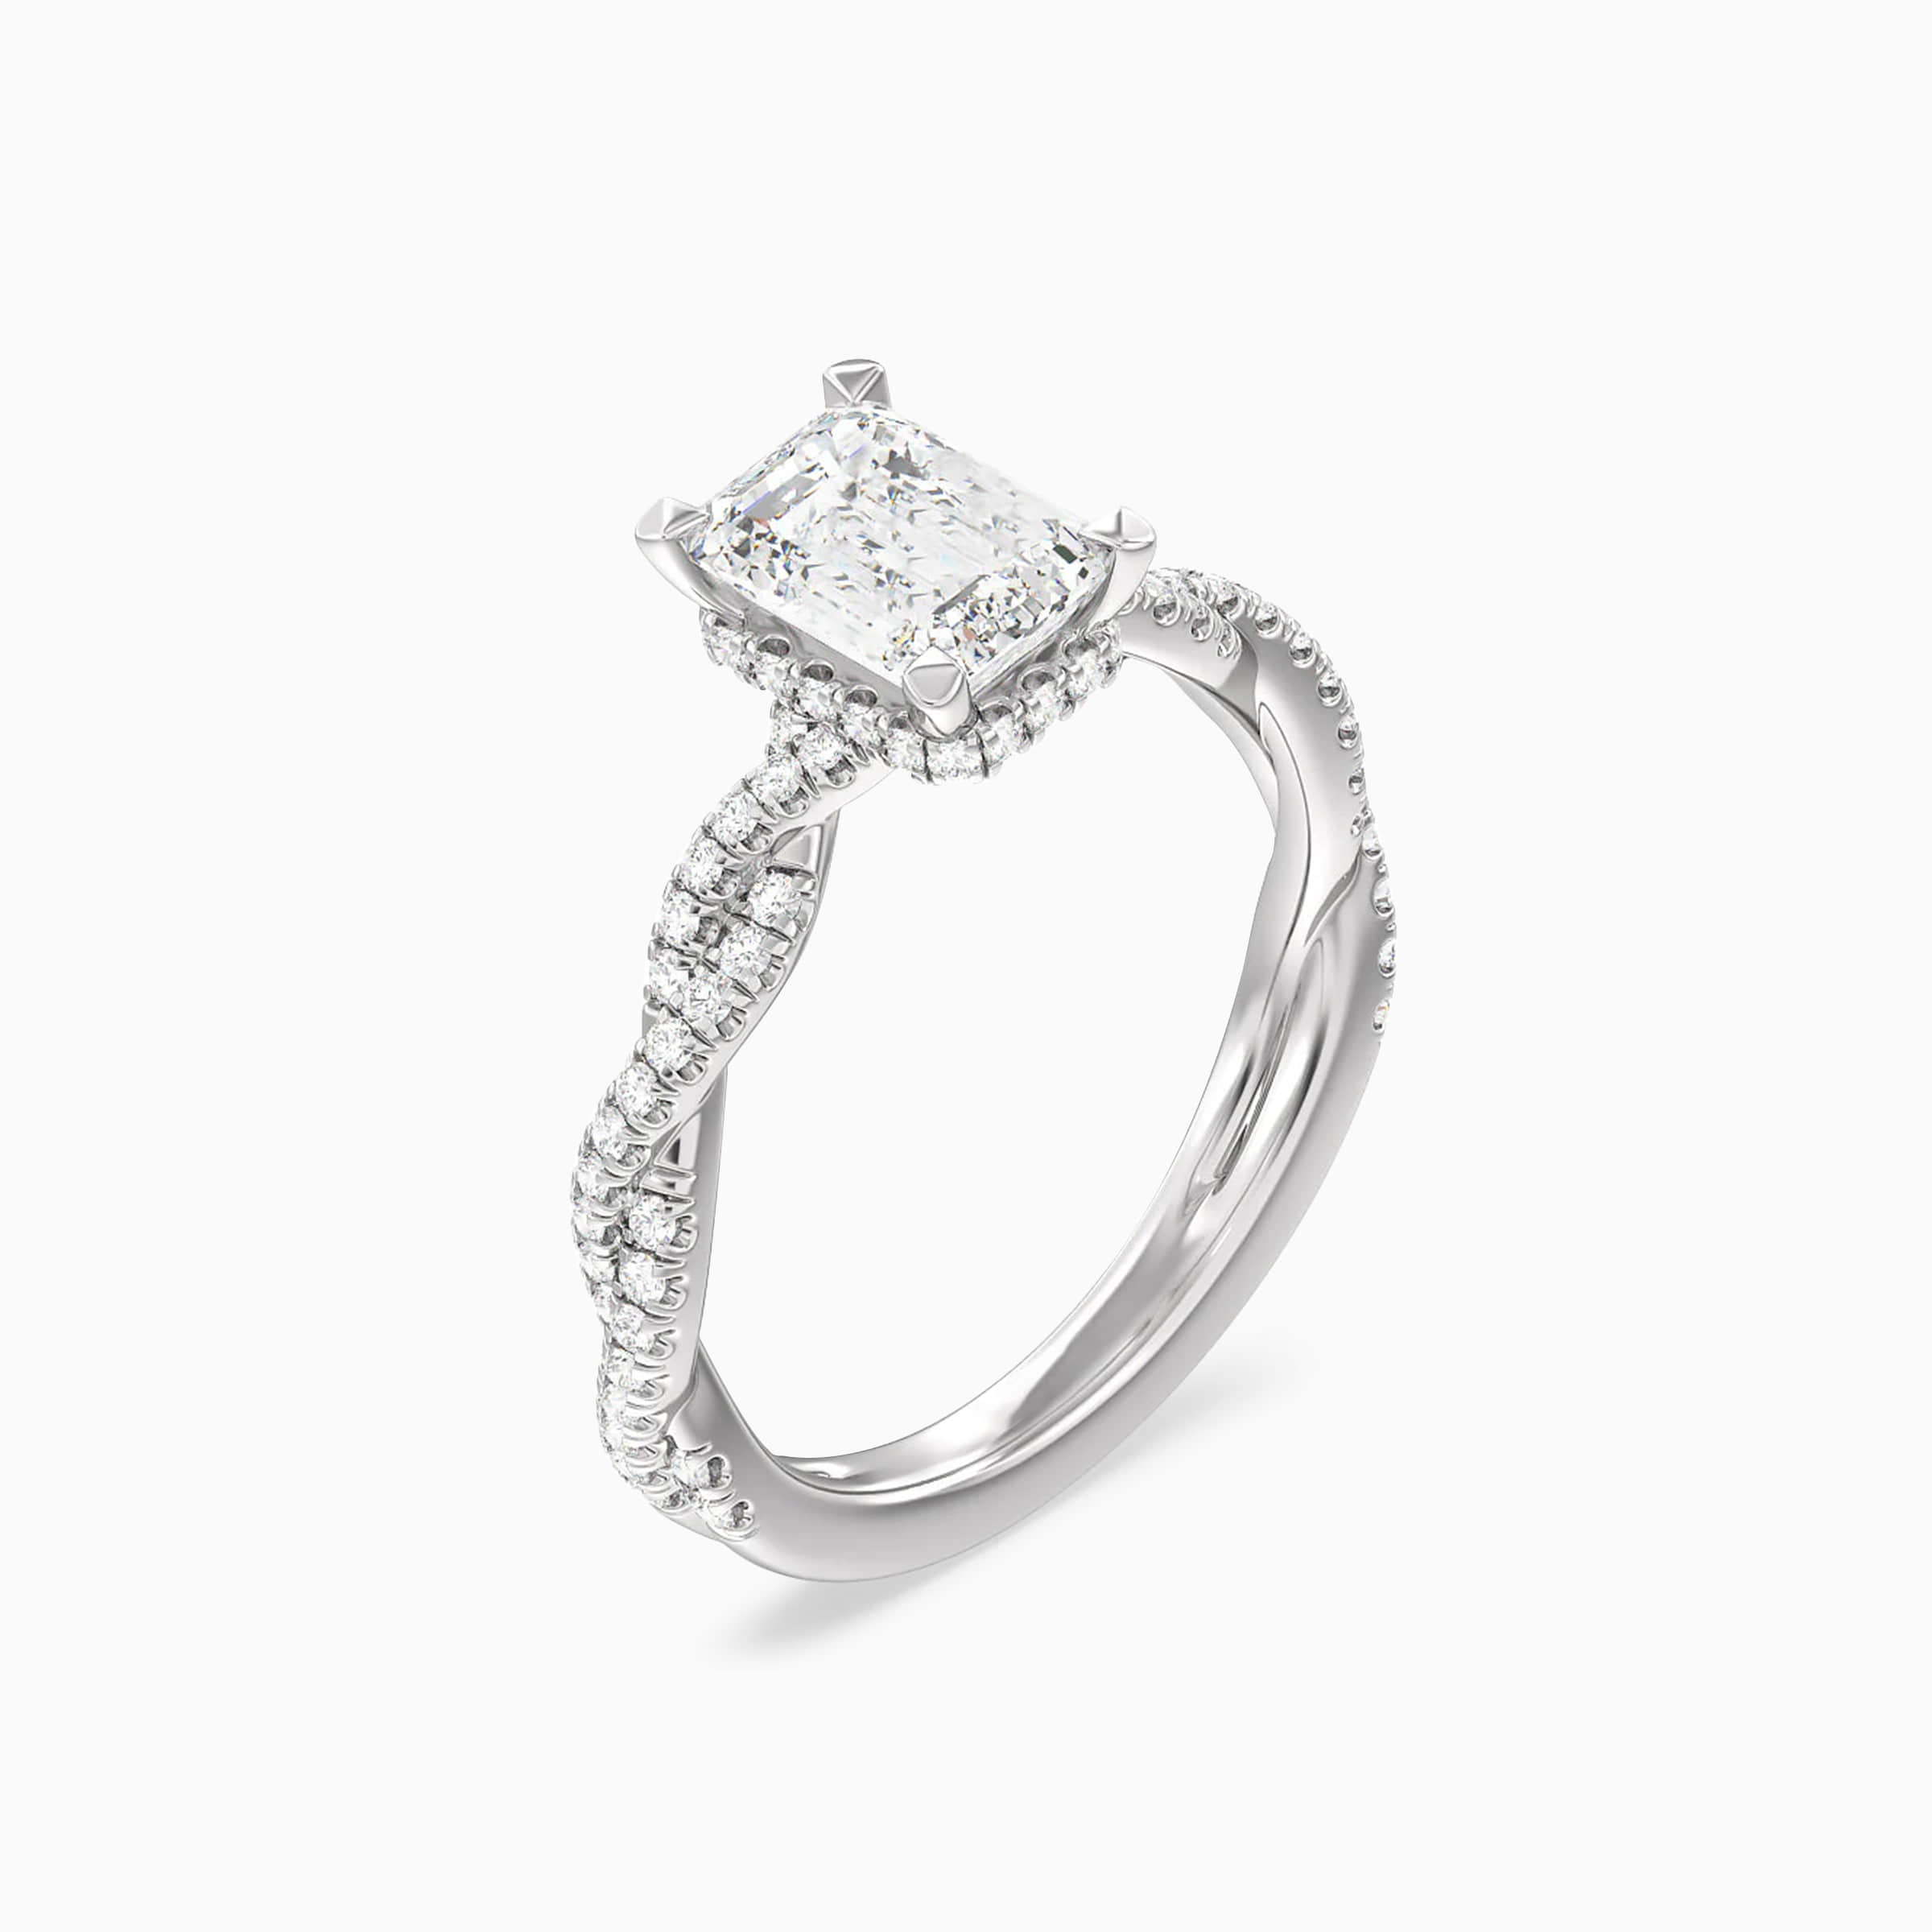 Darry Ring emerald cut twisted band enaggement ring in platinum